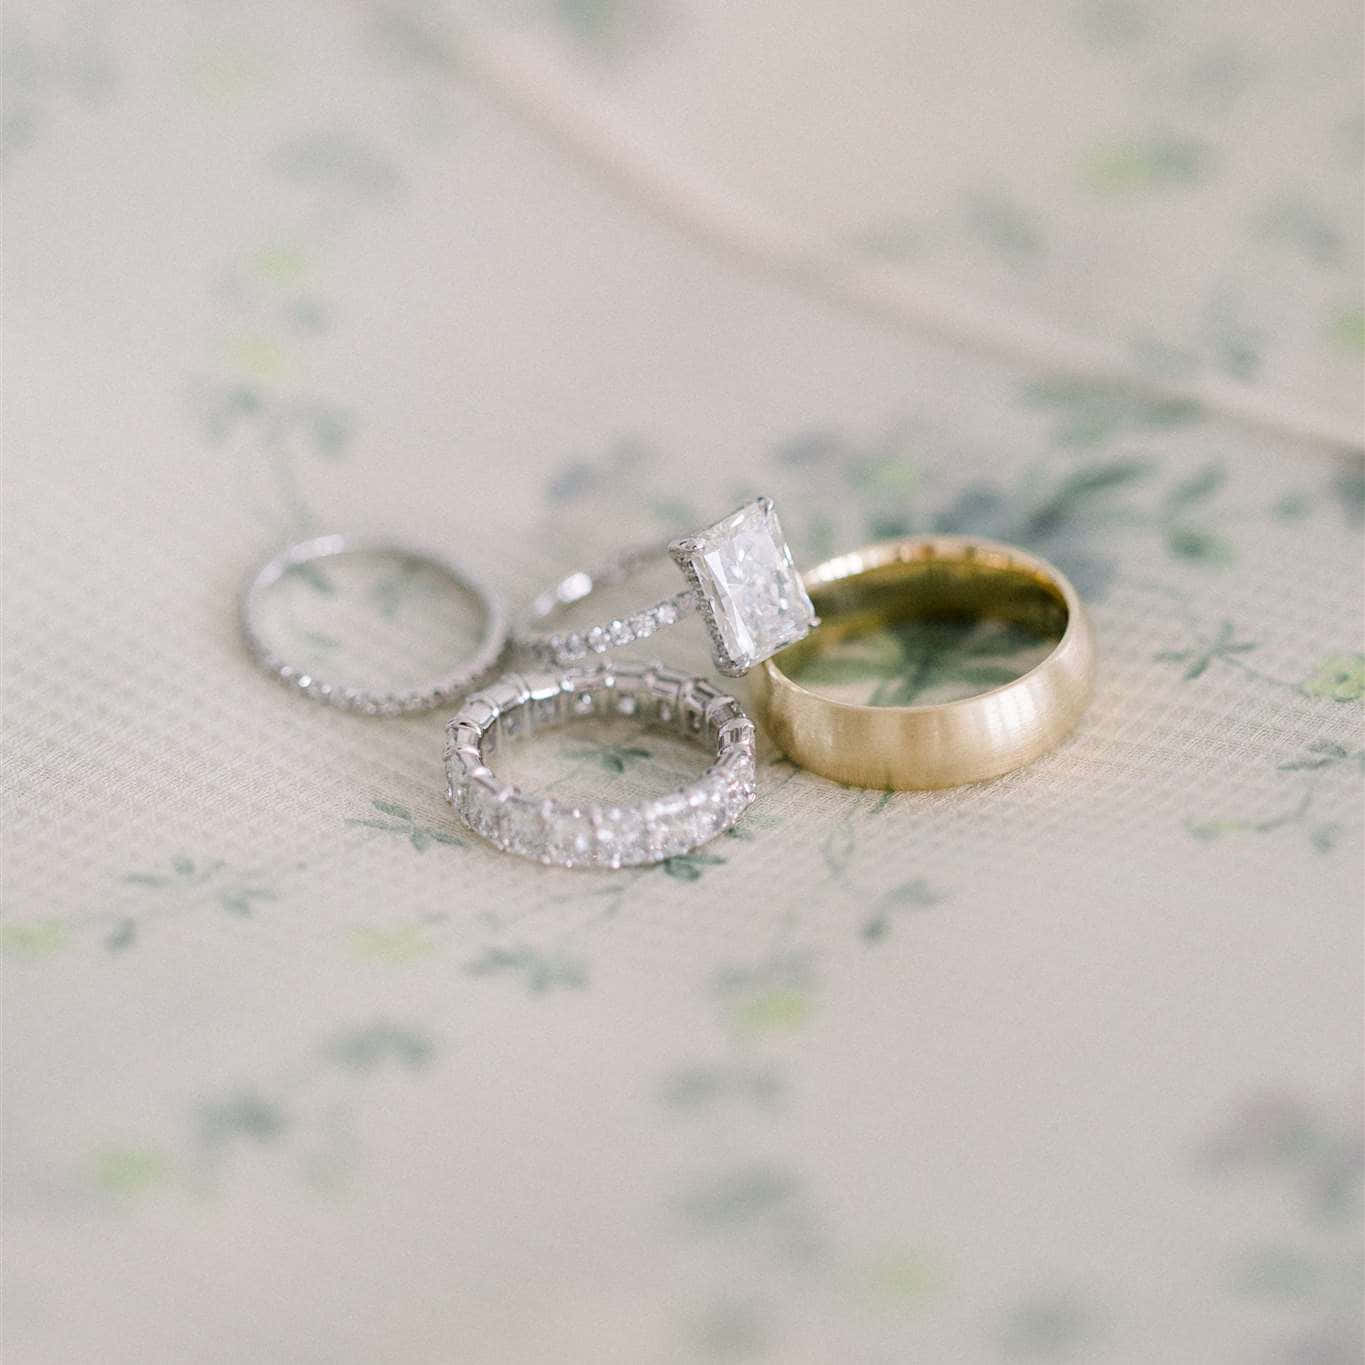 Celebrate Your Union with the Perfect Pair of Wedding Rings